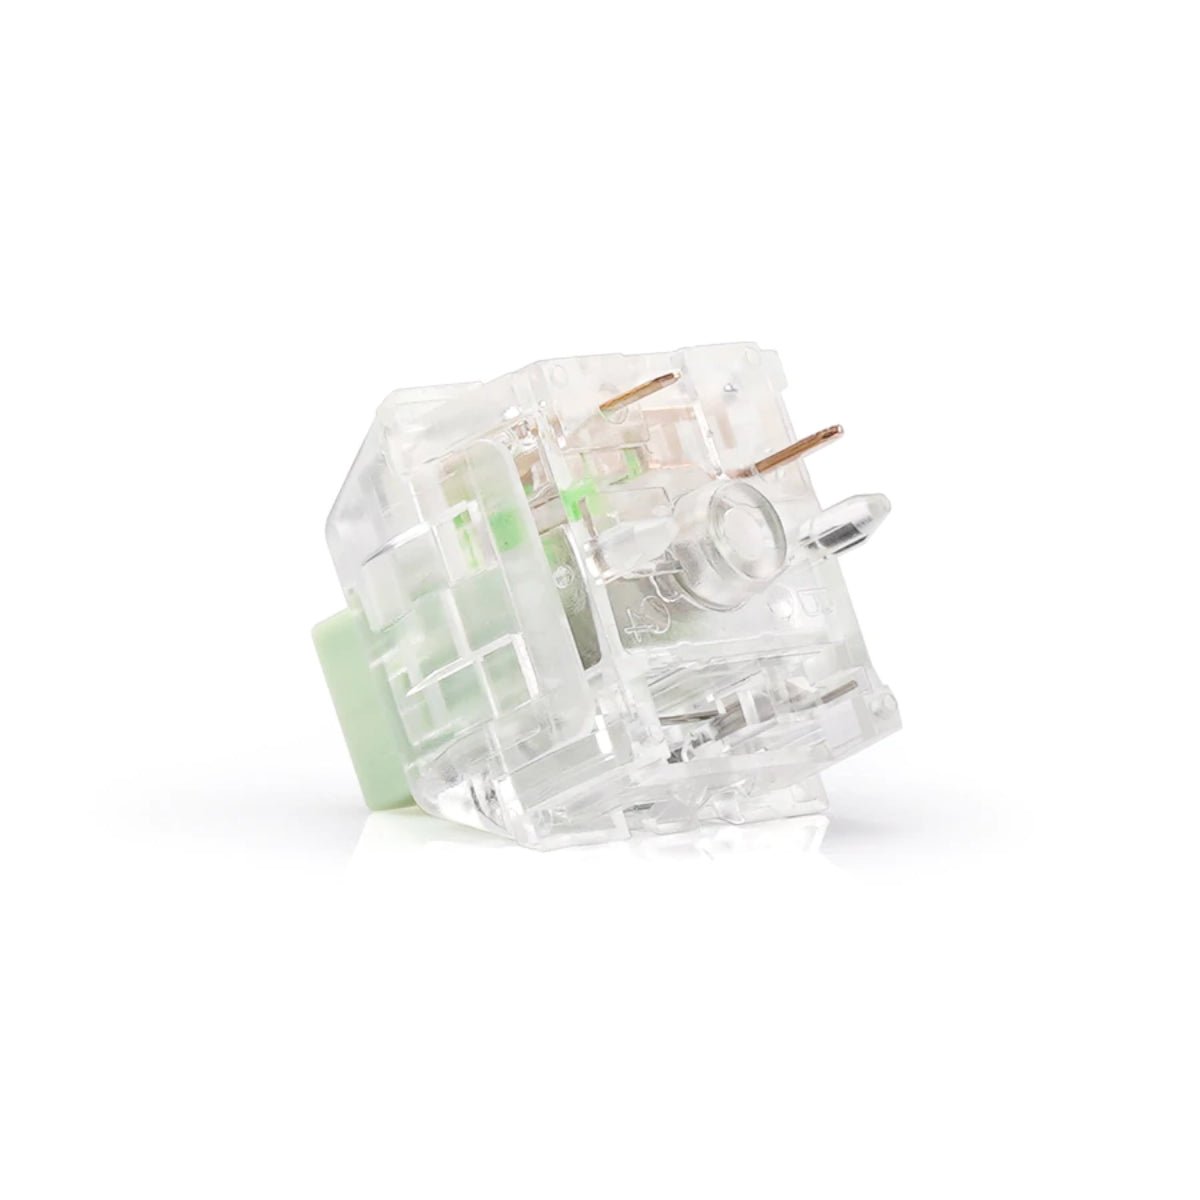 KBD Fans Kailh Box Crystal Switches - Jade - Store 974 | ستور ٩٧٤